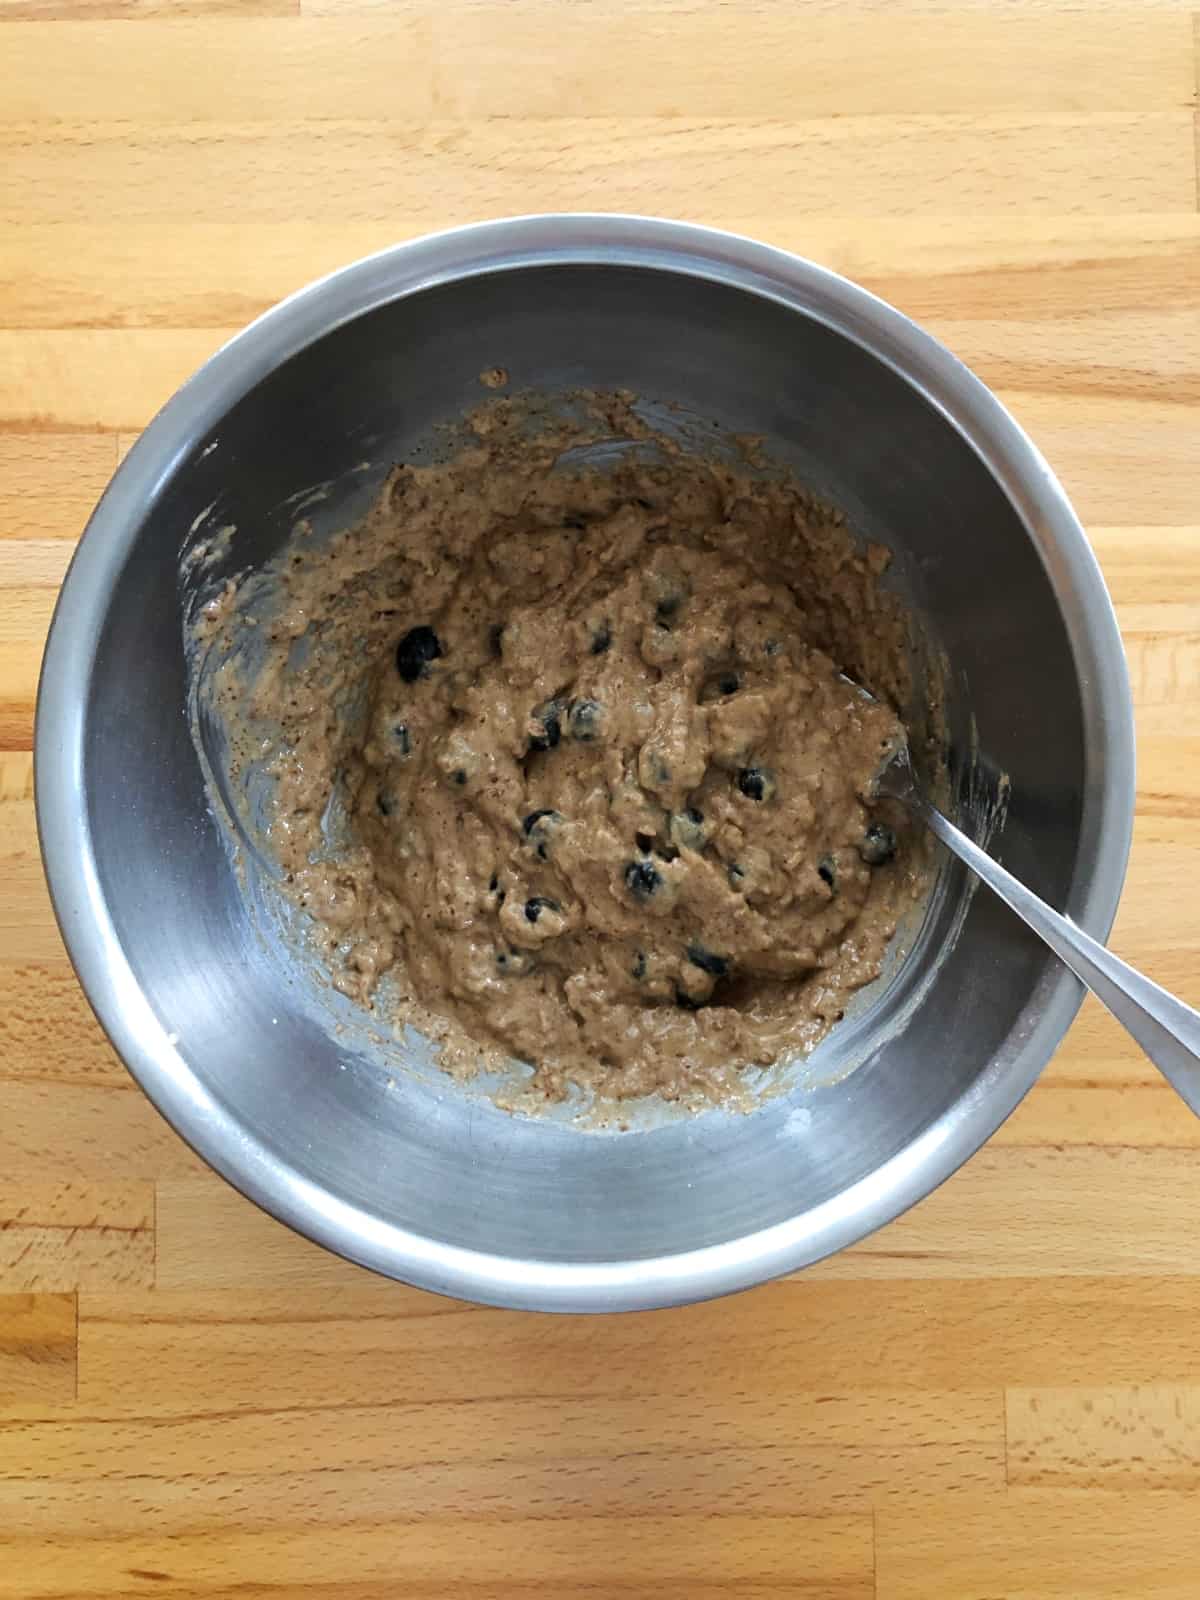 Folding fresh blueberries into bran muffin top batter in stainless mixing bowl with a fork.